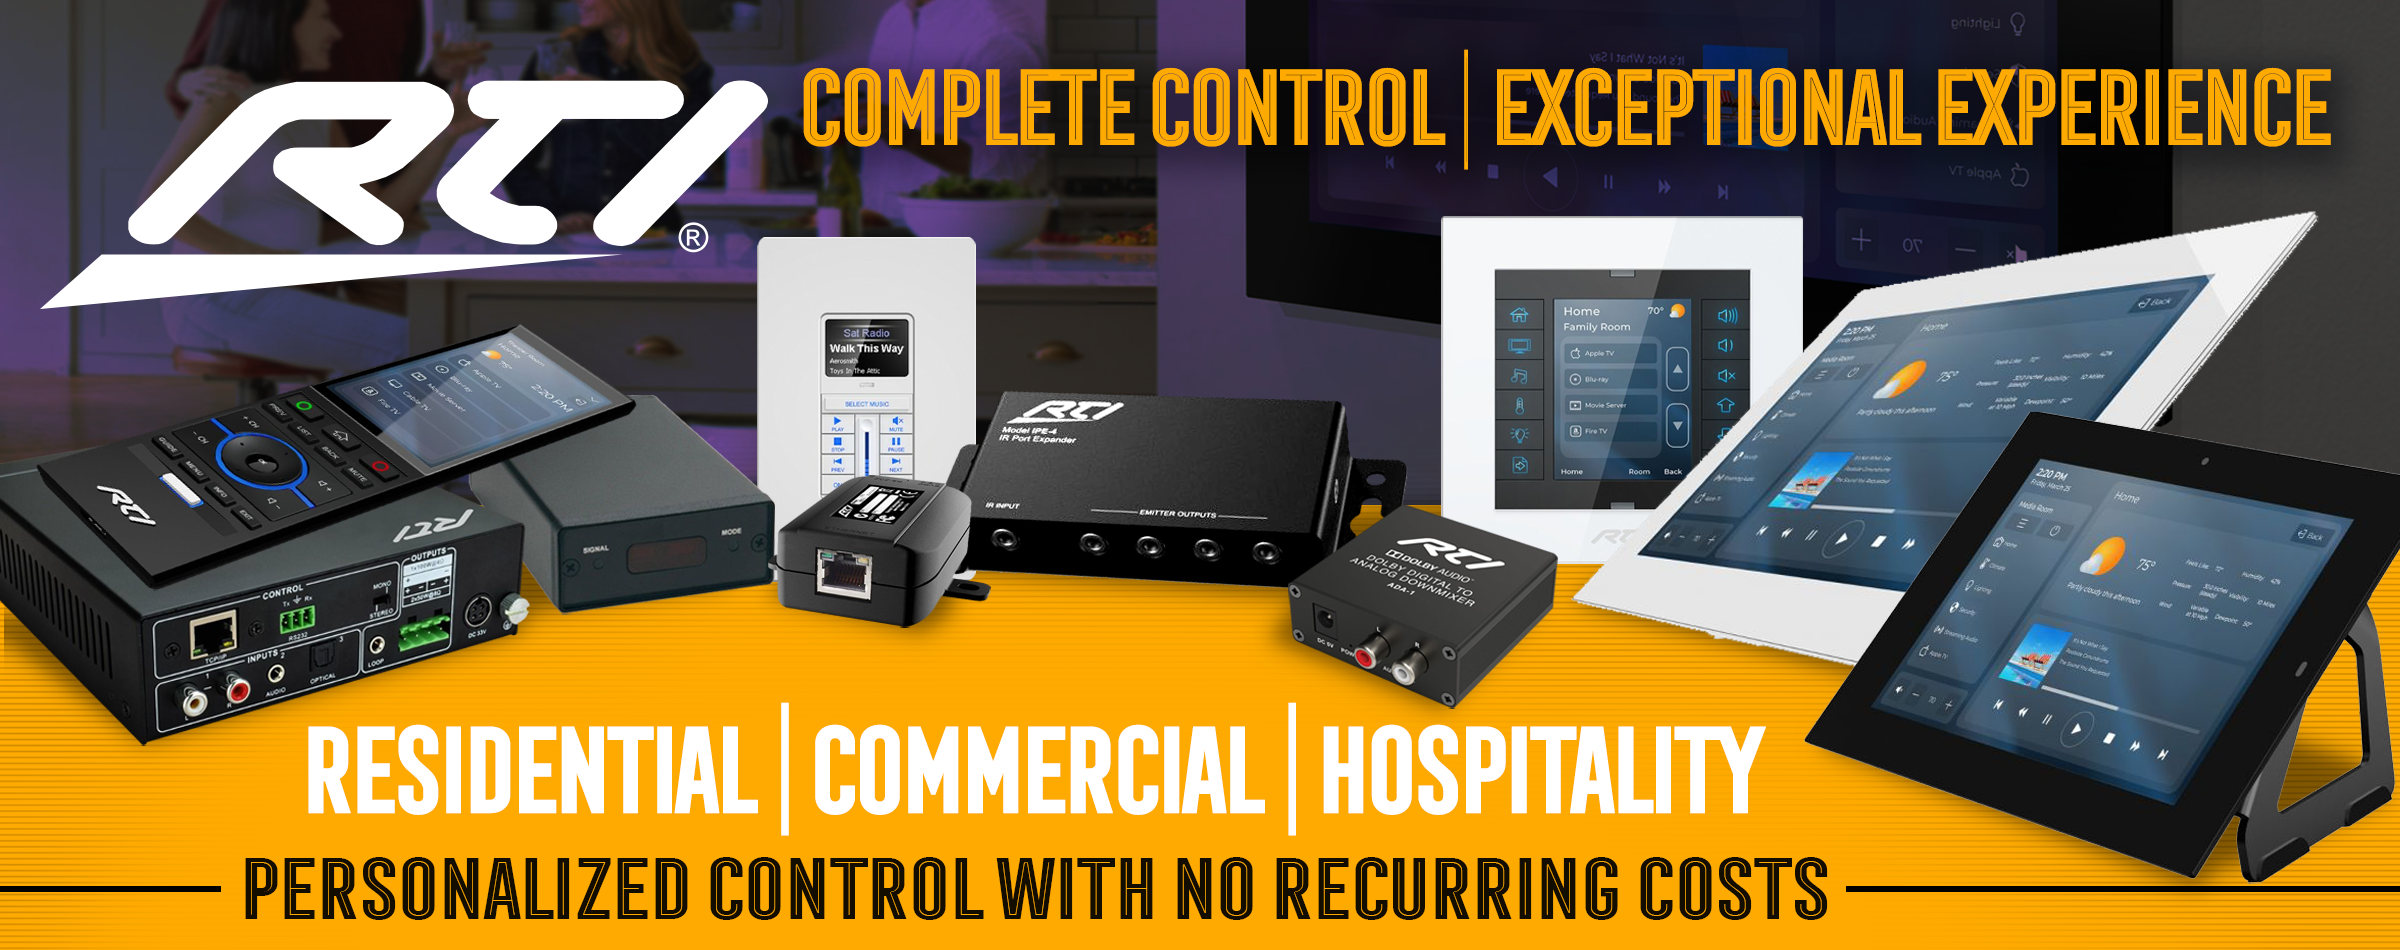 RTI...Complete Control-Exceptional Experience...No recurring costs